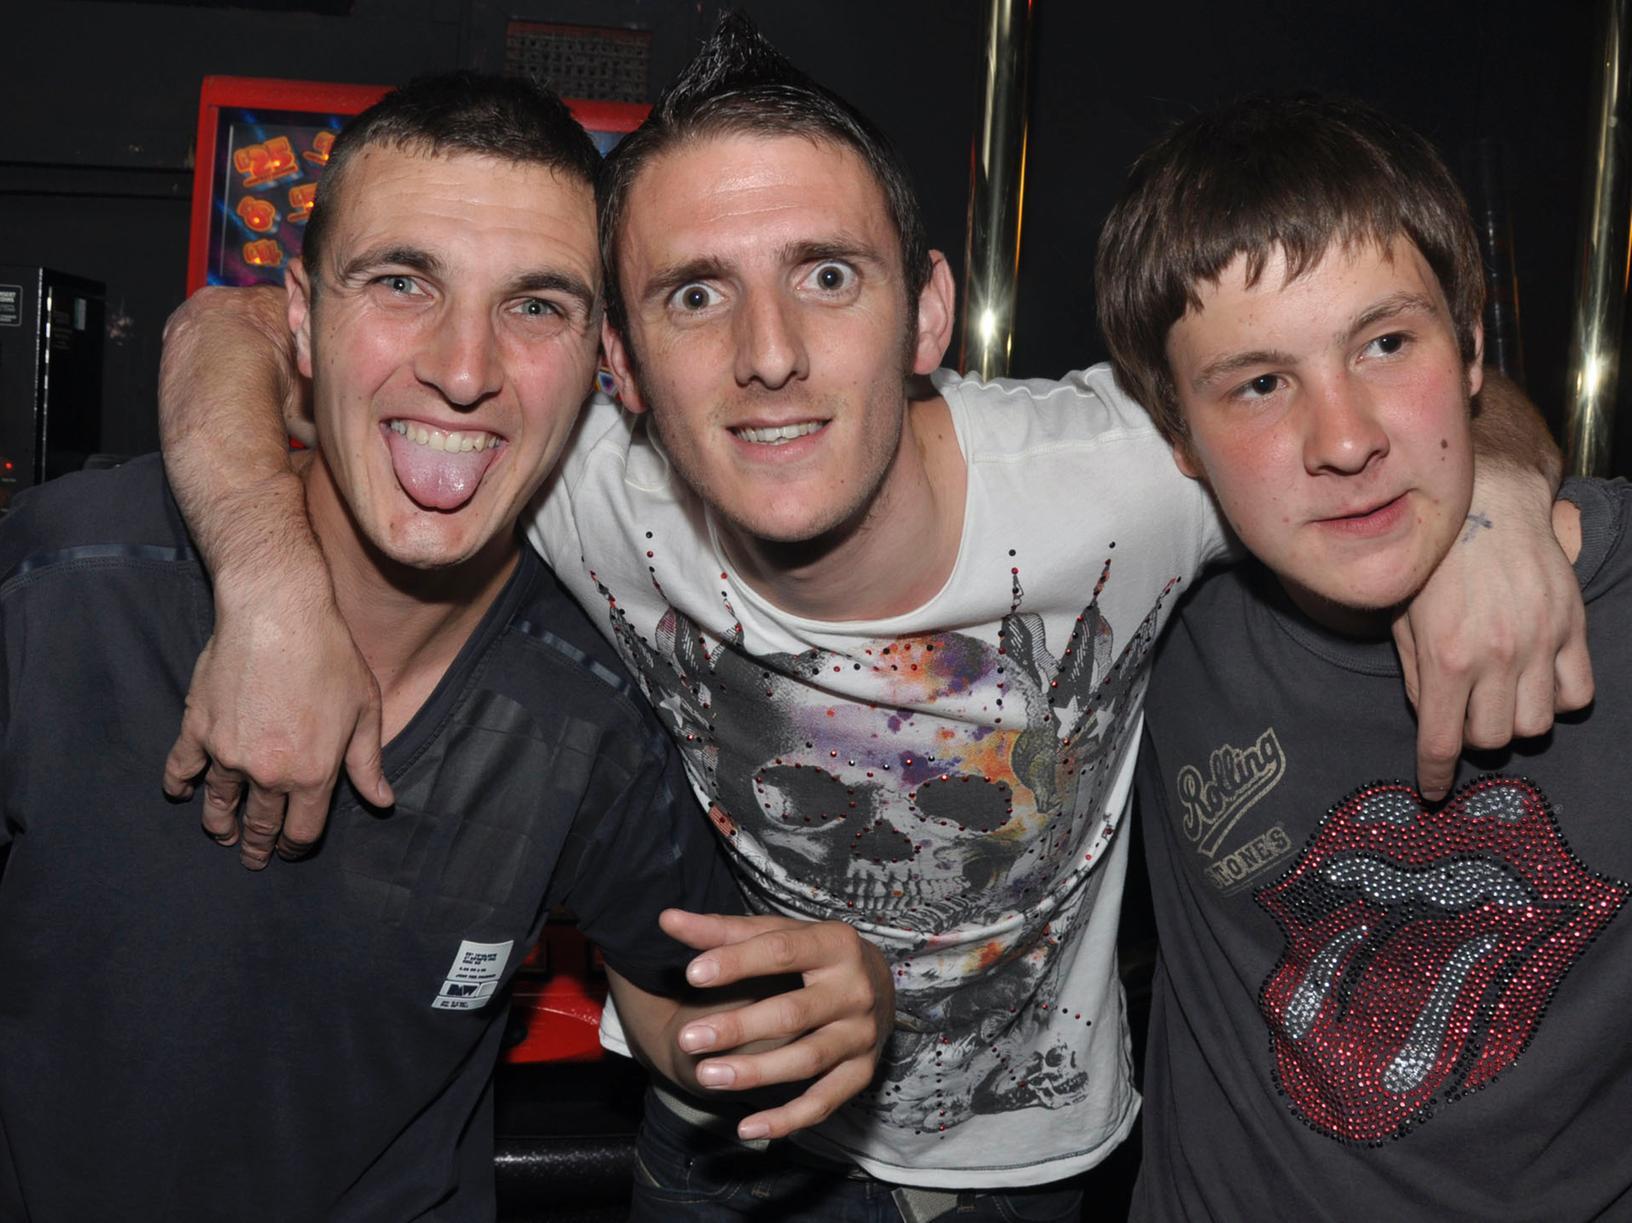 Mony, Liam and Tyson on a lads night out.